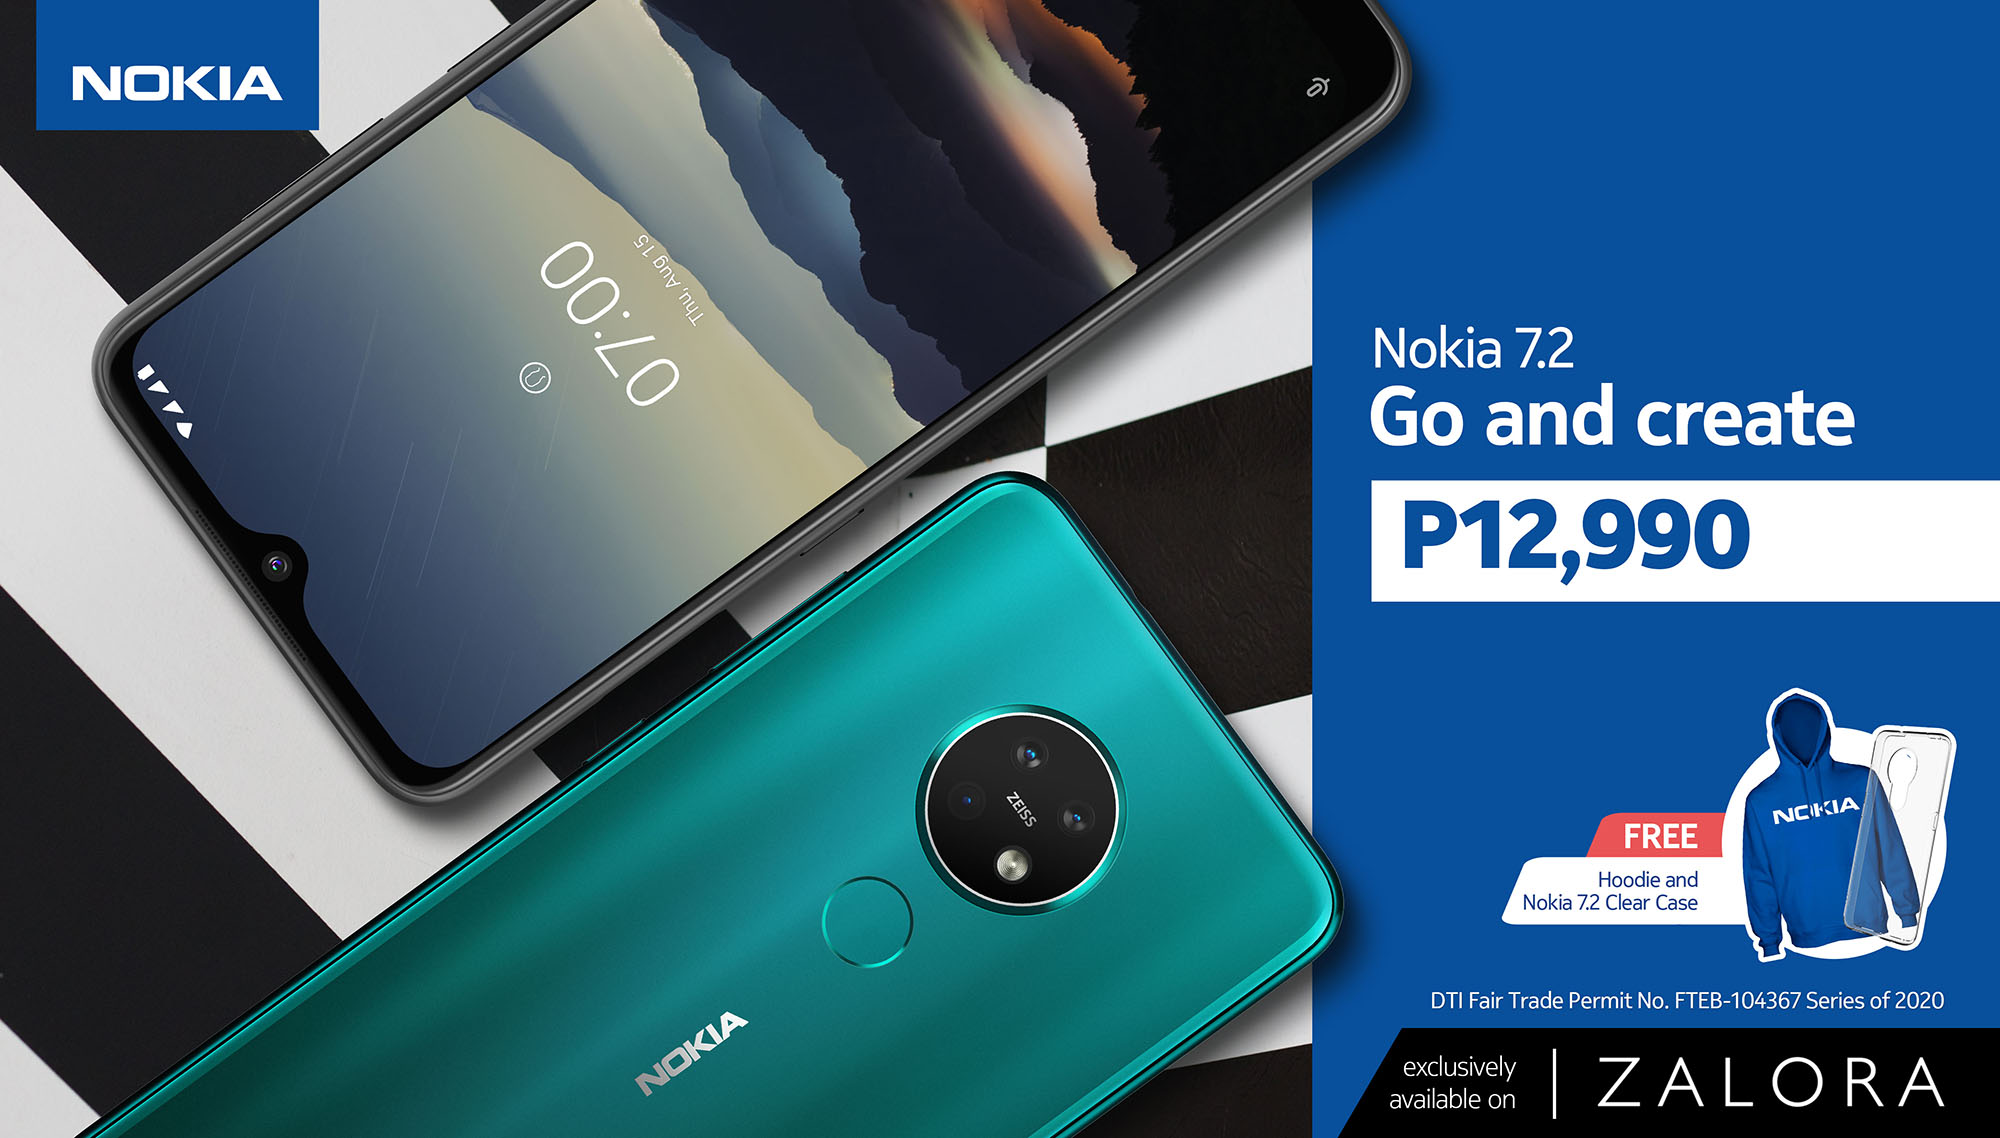 Nokia phones join Zalora’s Home and Lifestyle online shopping category offers exclusive discount on Nokia 7.2